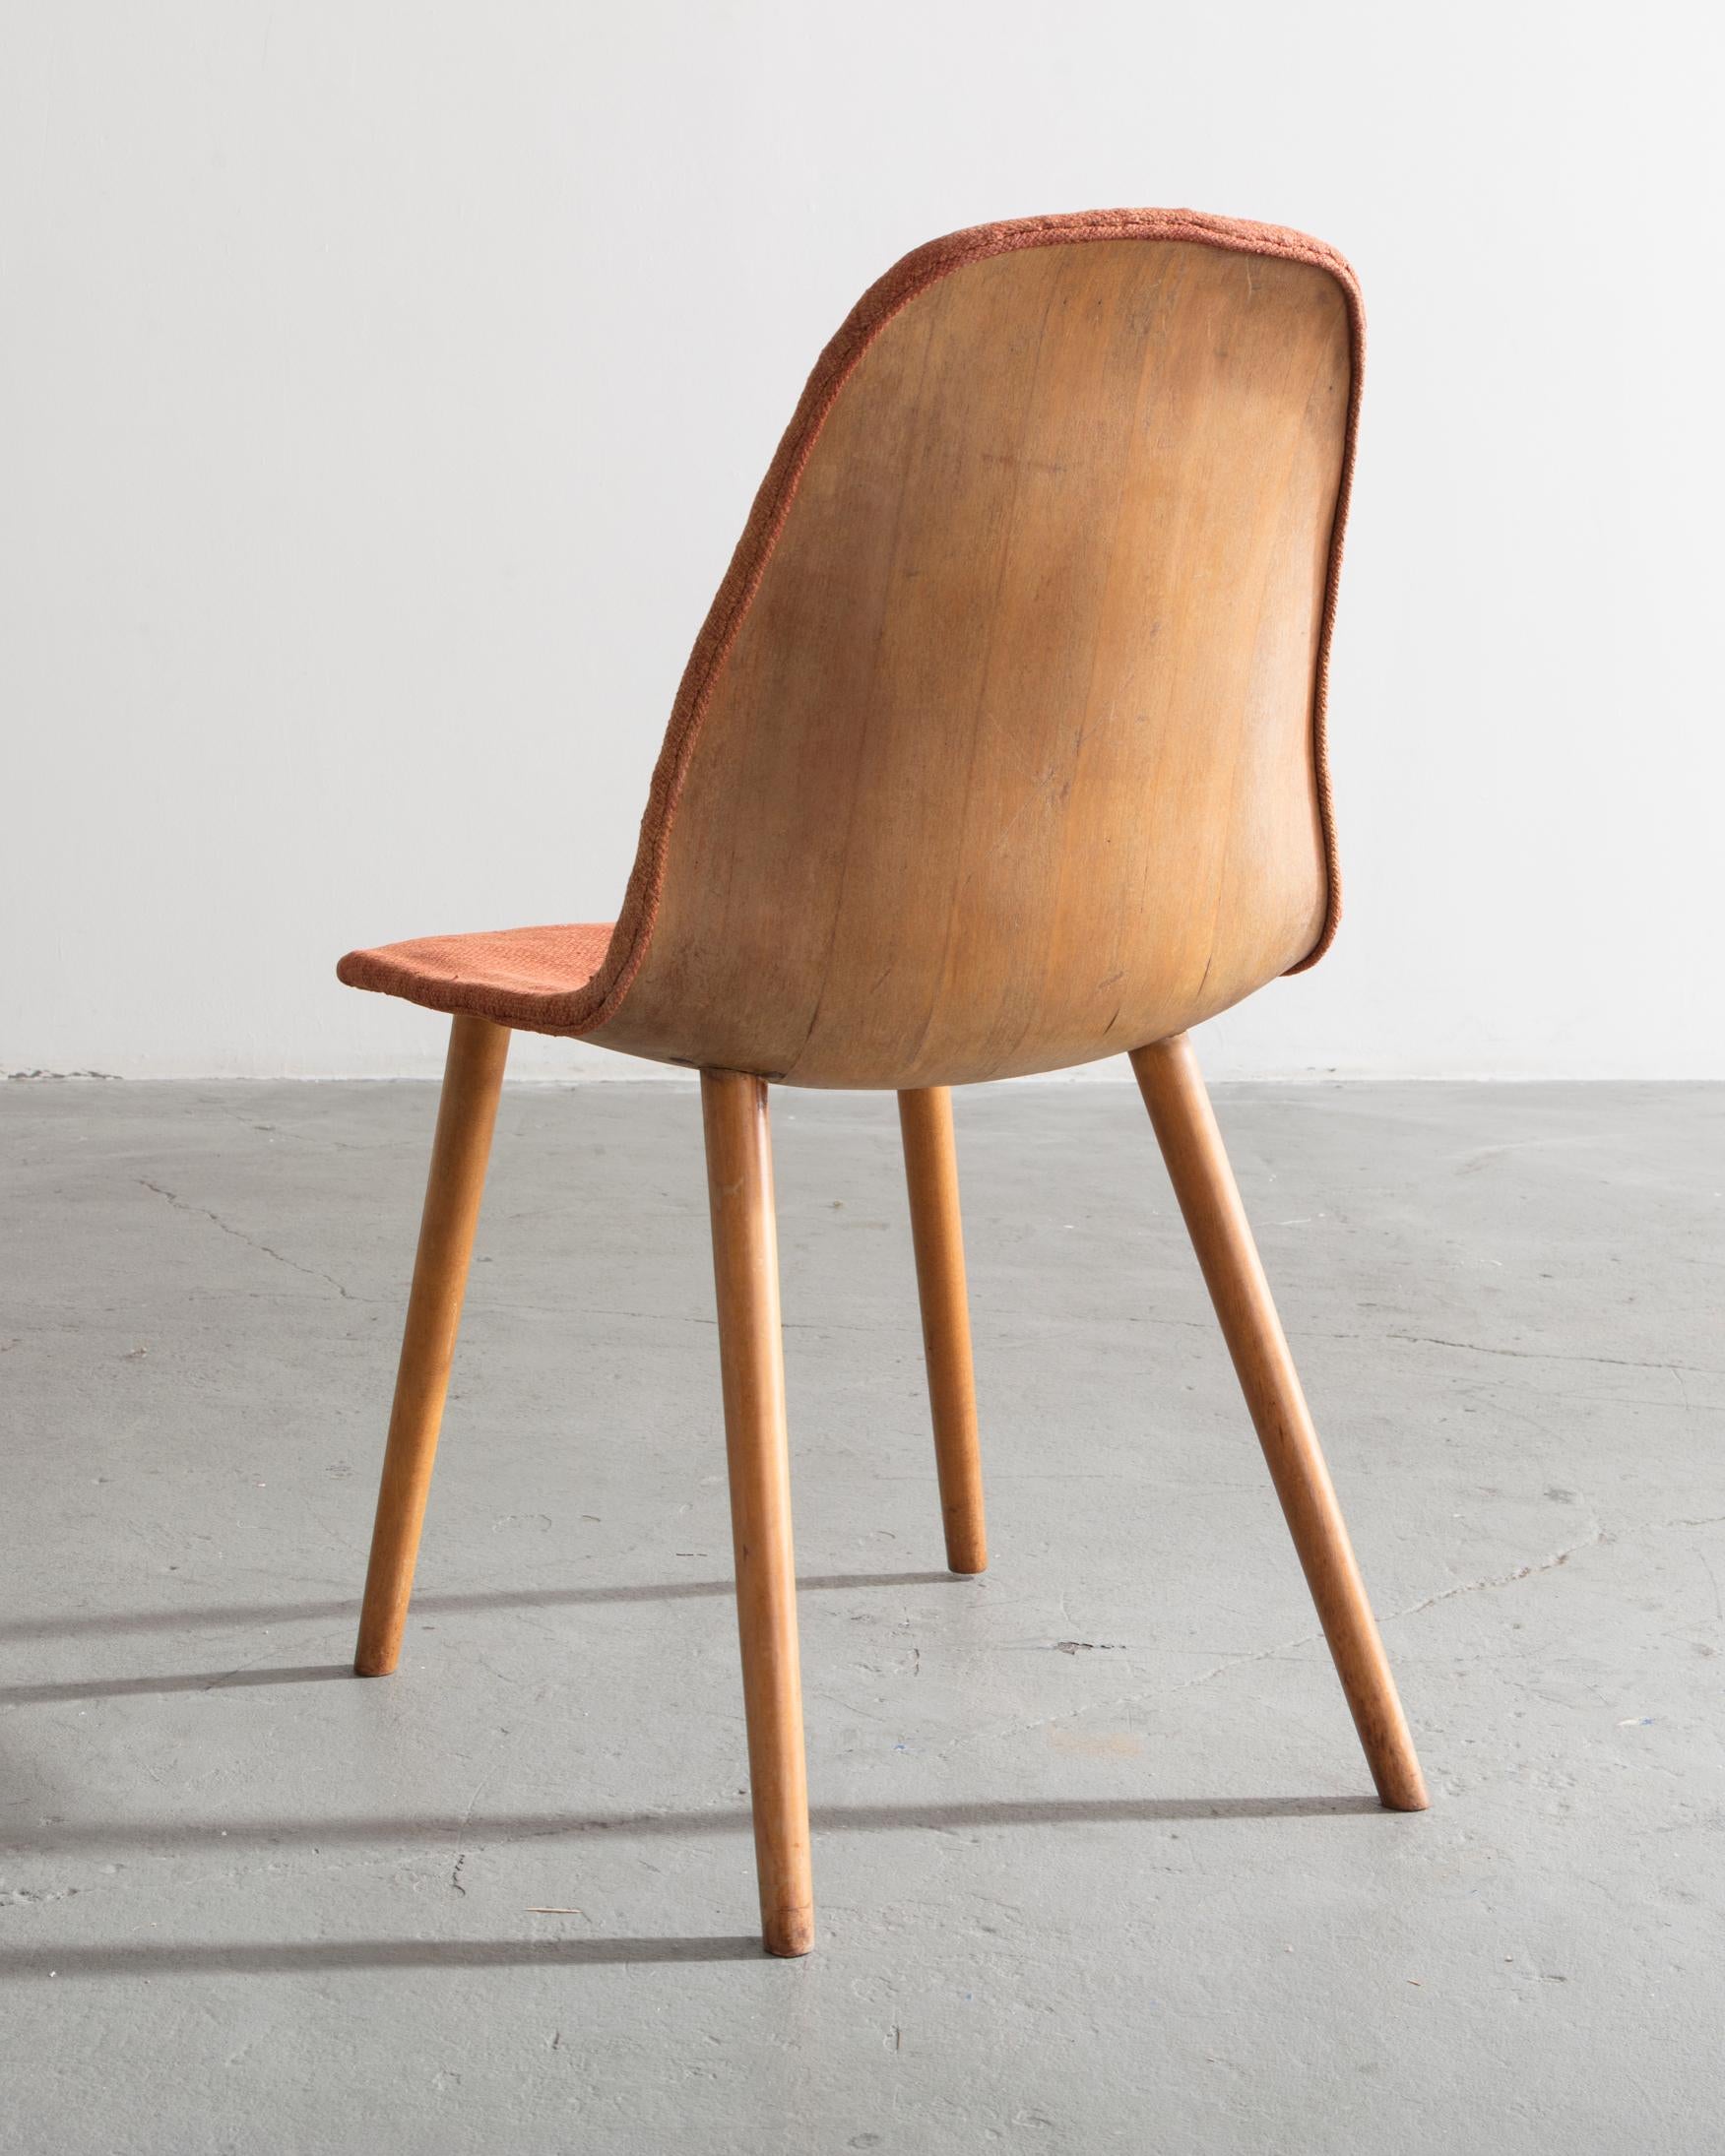 Mid-Century Modern Chair from the Organic Design Competition by Charles Eames and Eero Saarinen